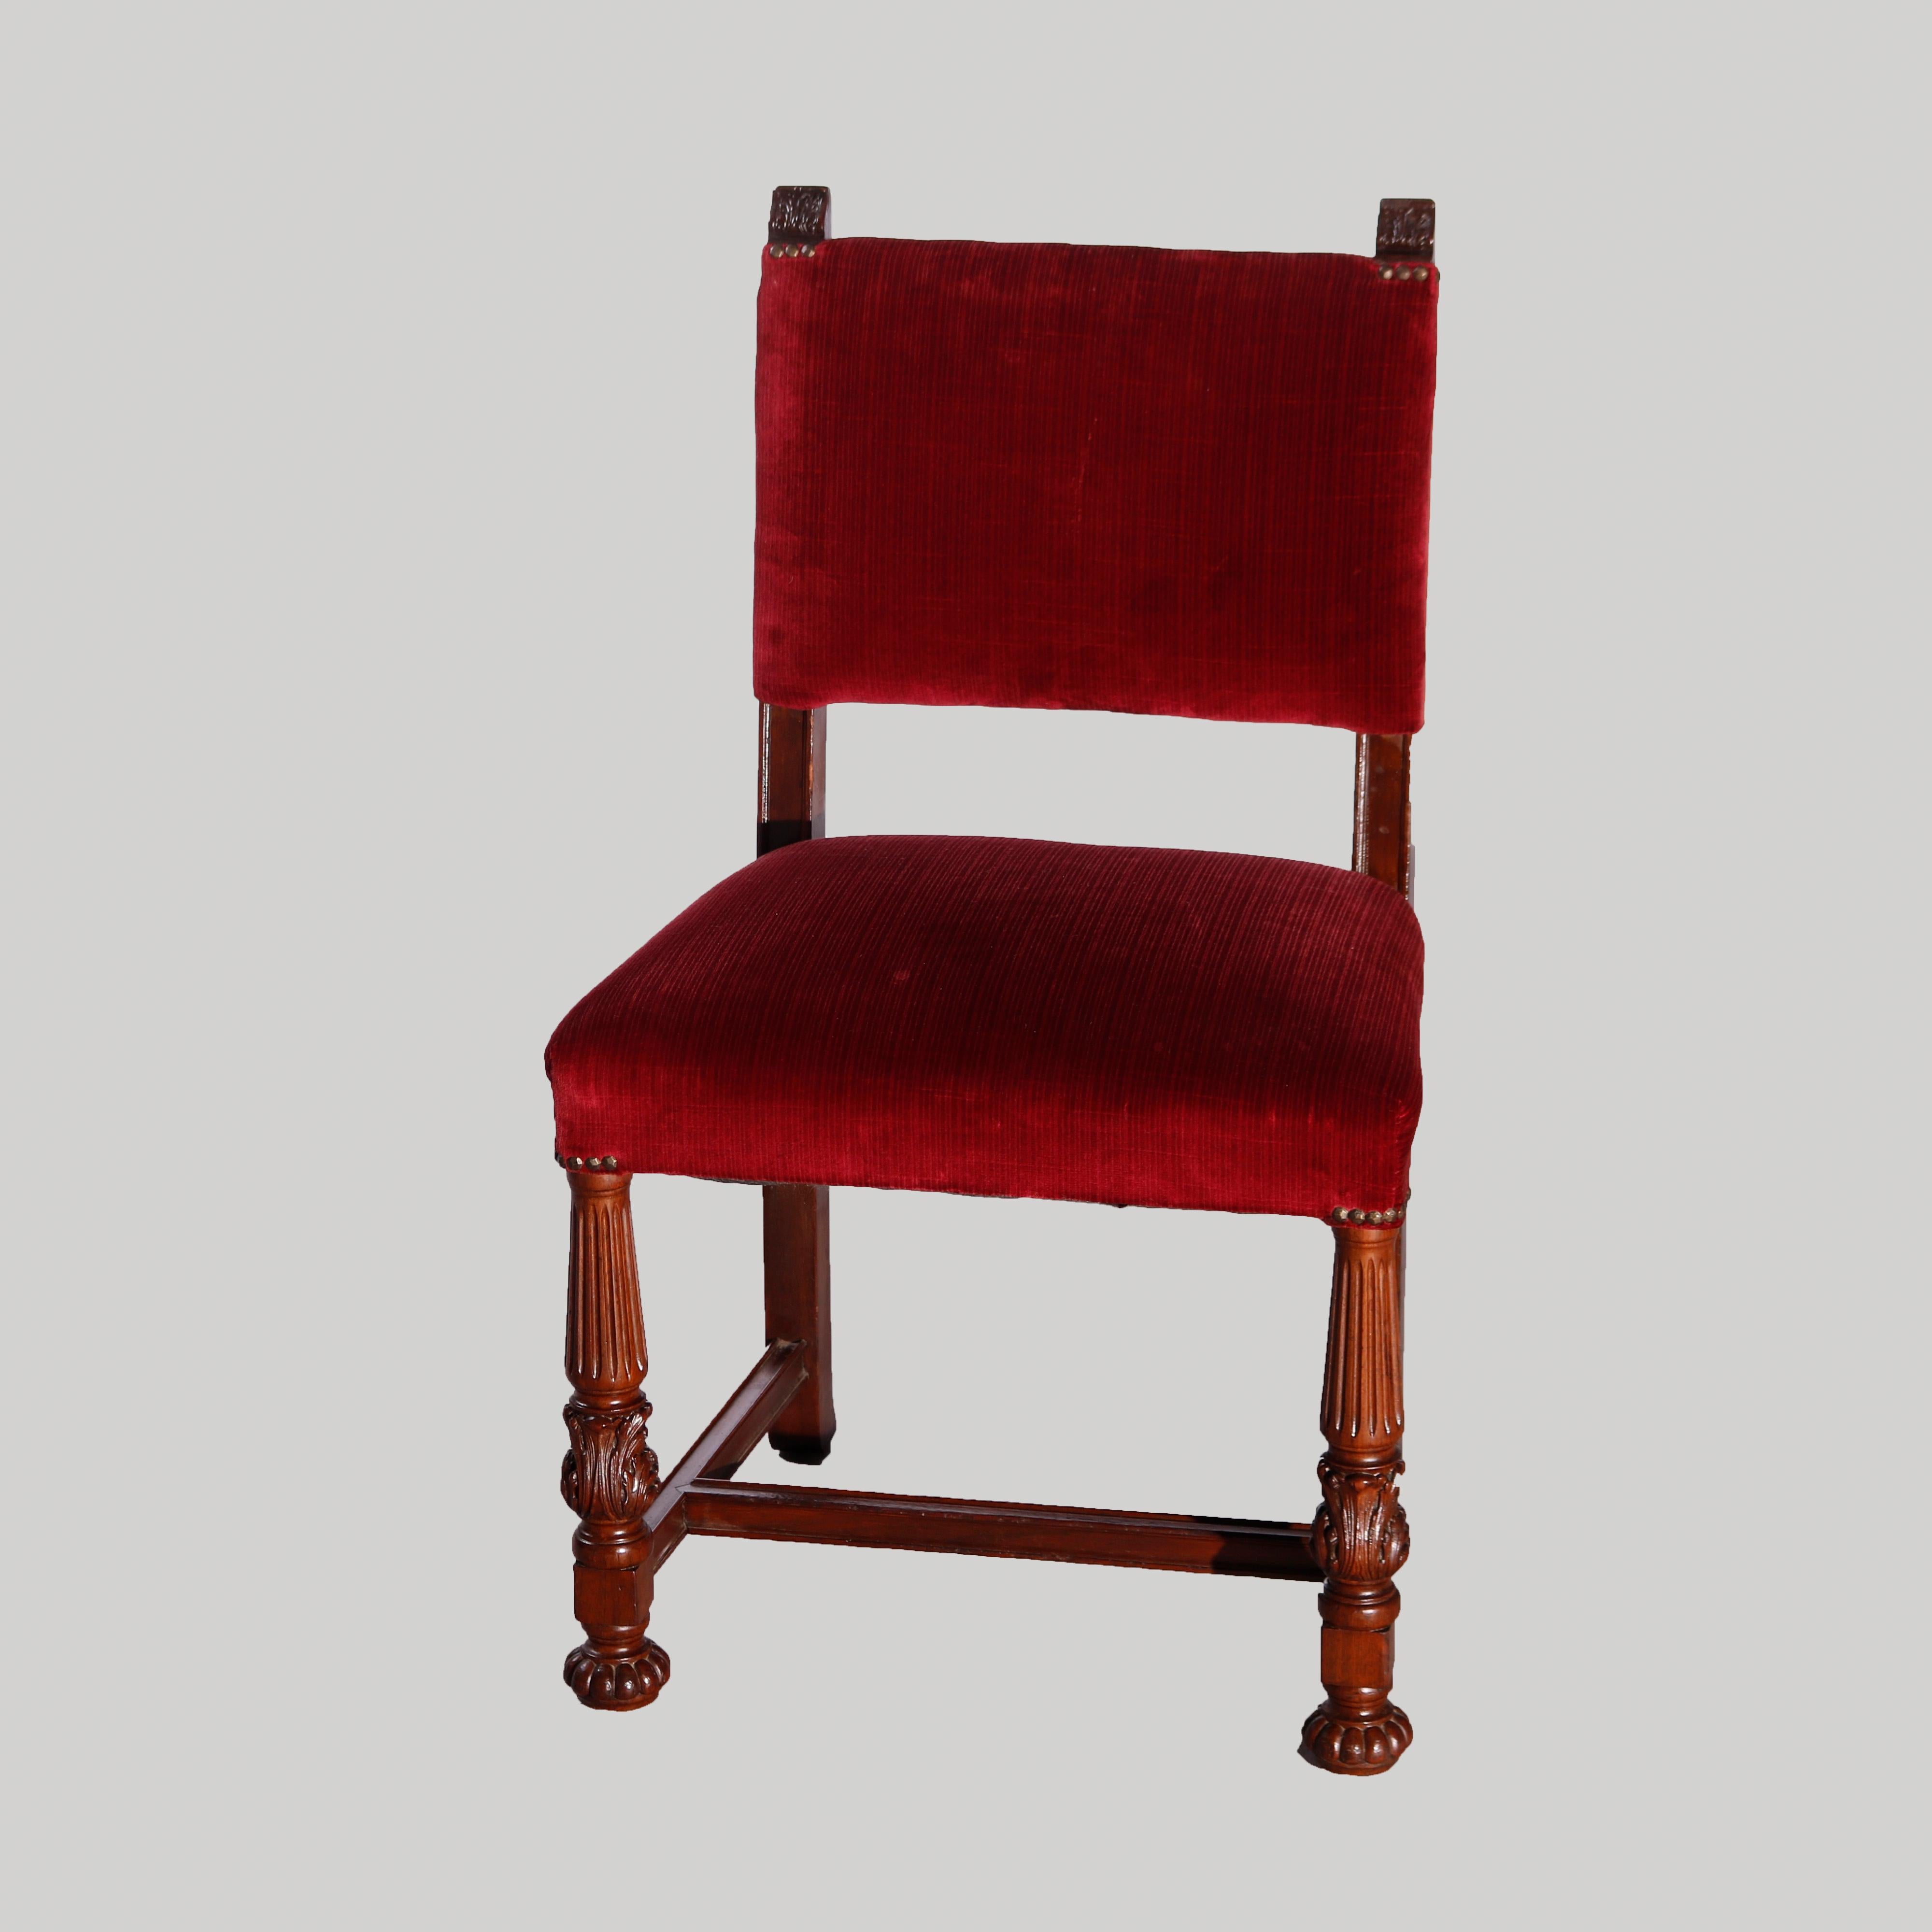 An antique set of six Classical French Renaissance dining chairs offer complementing upholstered backs and seats on mahogany frames with carved reeded and foliate elements, set includes one armchair and five sides, c1900

Measures- 37.5''H x